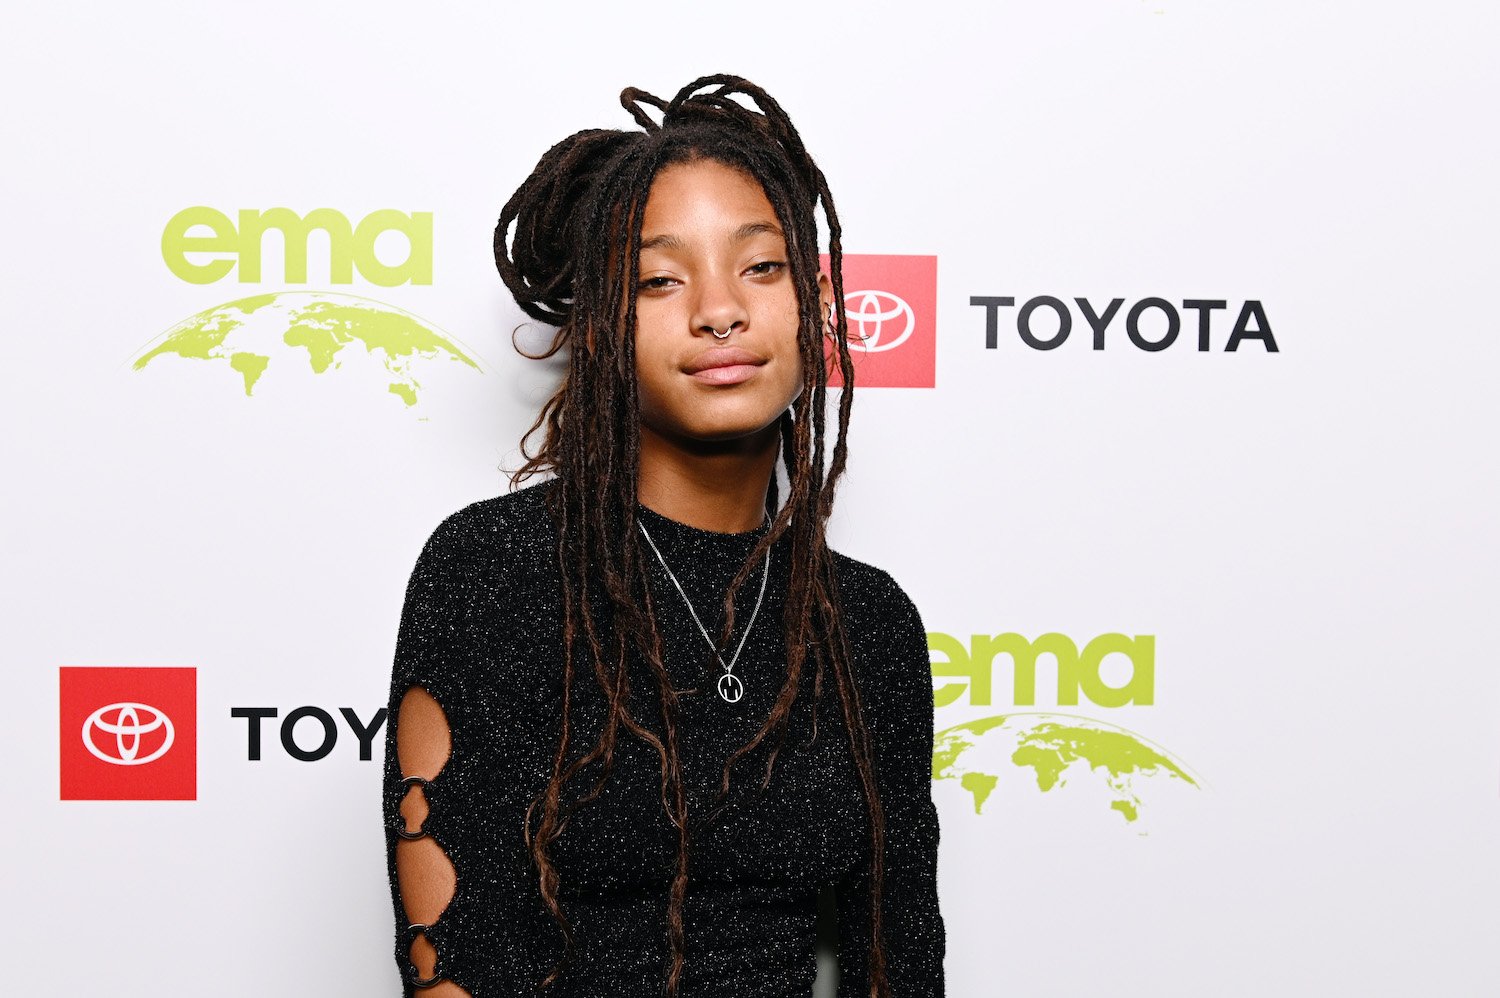 Willow Smith poses at the Environmental Media Association 2nd Annual Honors Benefit Gala in 2019